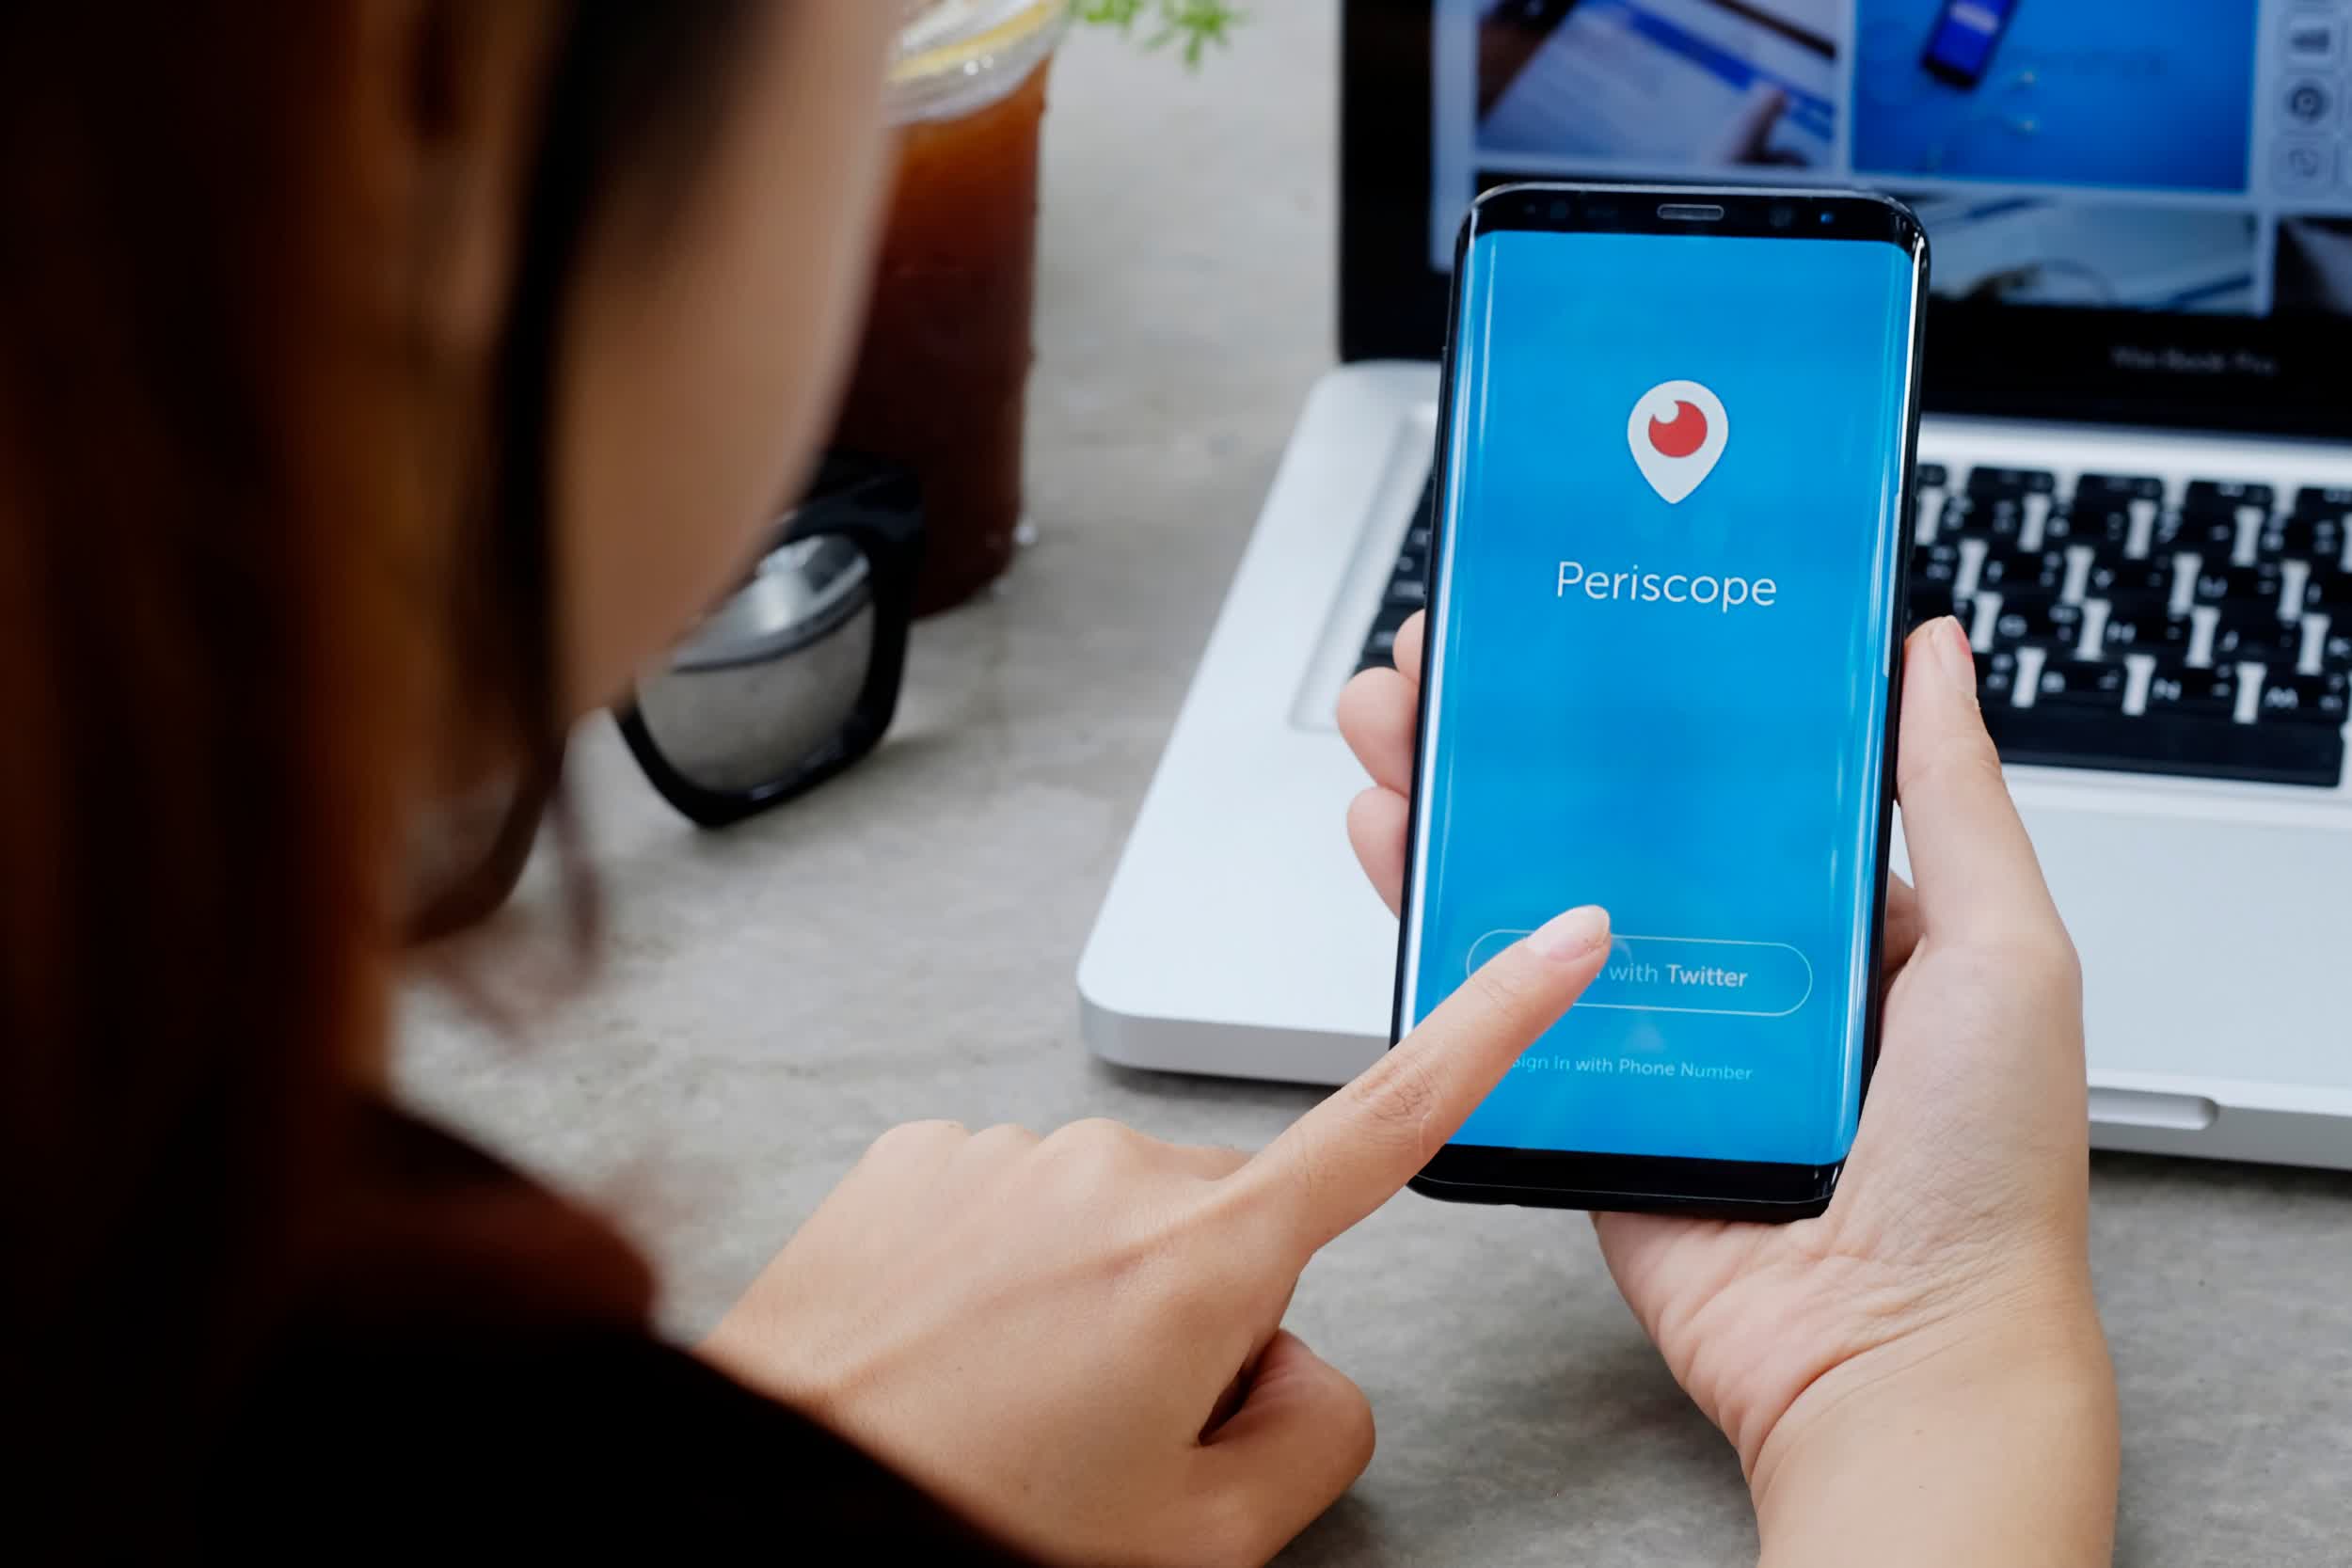 Periscope closes after core features were rolled into Twitter